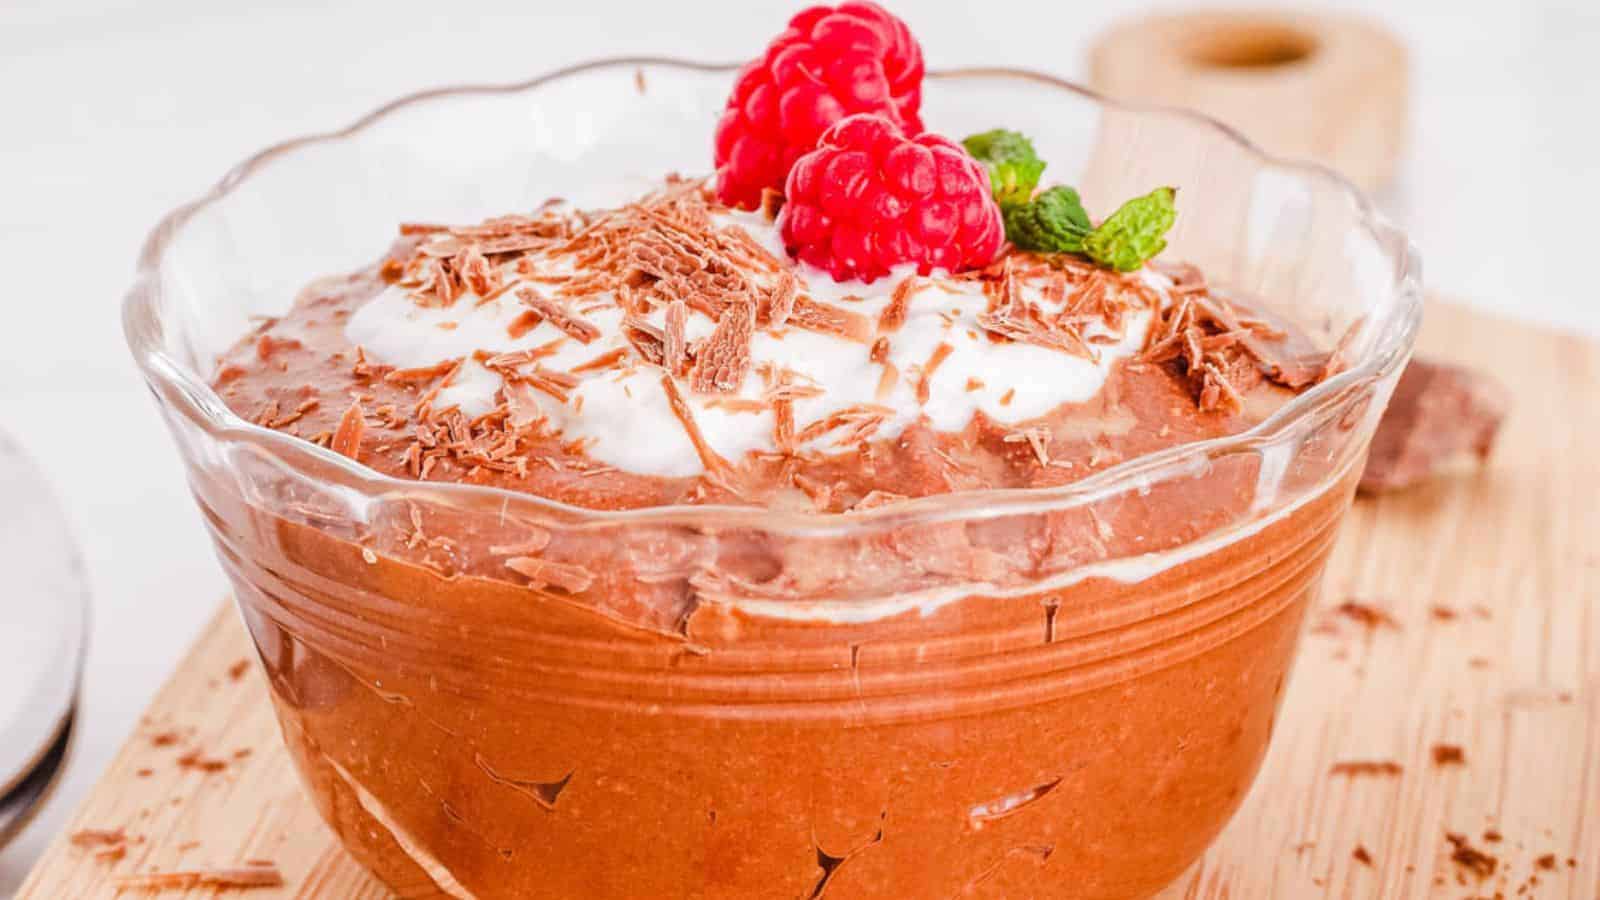 <p>Need a quick and easy dessert that’s sure to impress? Say hello to this 5-ingredient vegan chocolate coconut mousse! Whether you’re hosting a dinner party or just craving something sweet, this mousse is sure to hit the spot. And the best part? It’s made with simple ingredients you probably already have in your pantry – talk about a win-win!<br><strong>Get the Recipe: </strong><a href="https://twocityvegans.com/vegan-chocolate-coconut-mousse/?utm_source=msn&utm_medium=page&utm_campaign=msn">5 Ingredient Vegan Chocolate Coconut Mousse Recipe</a></p>